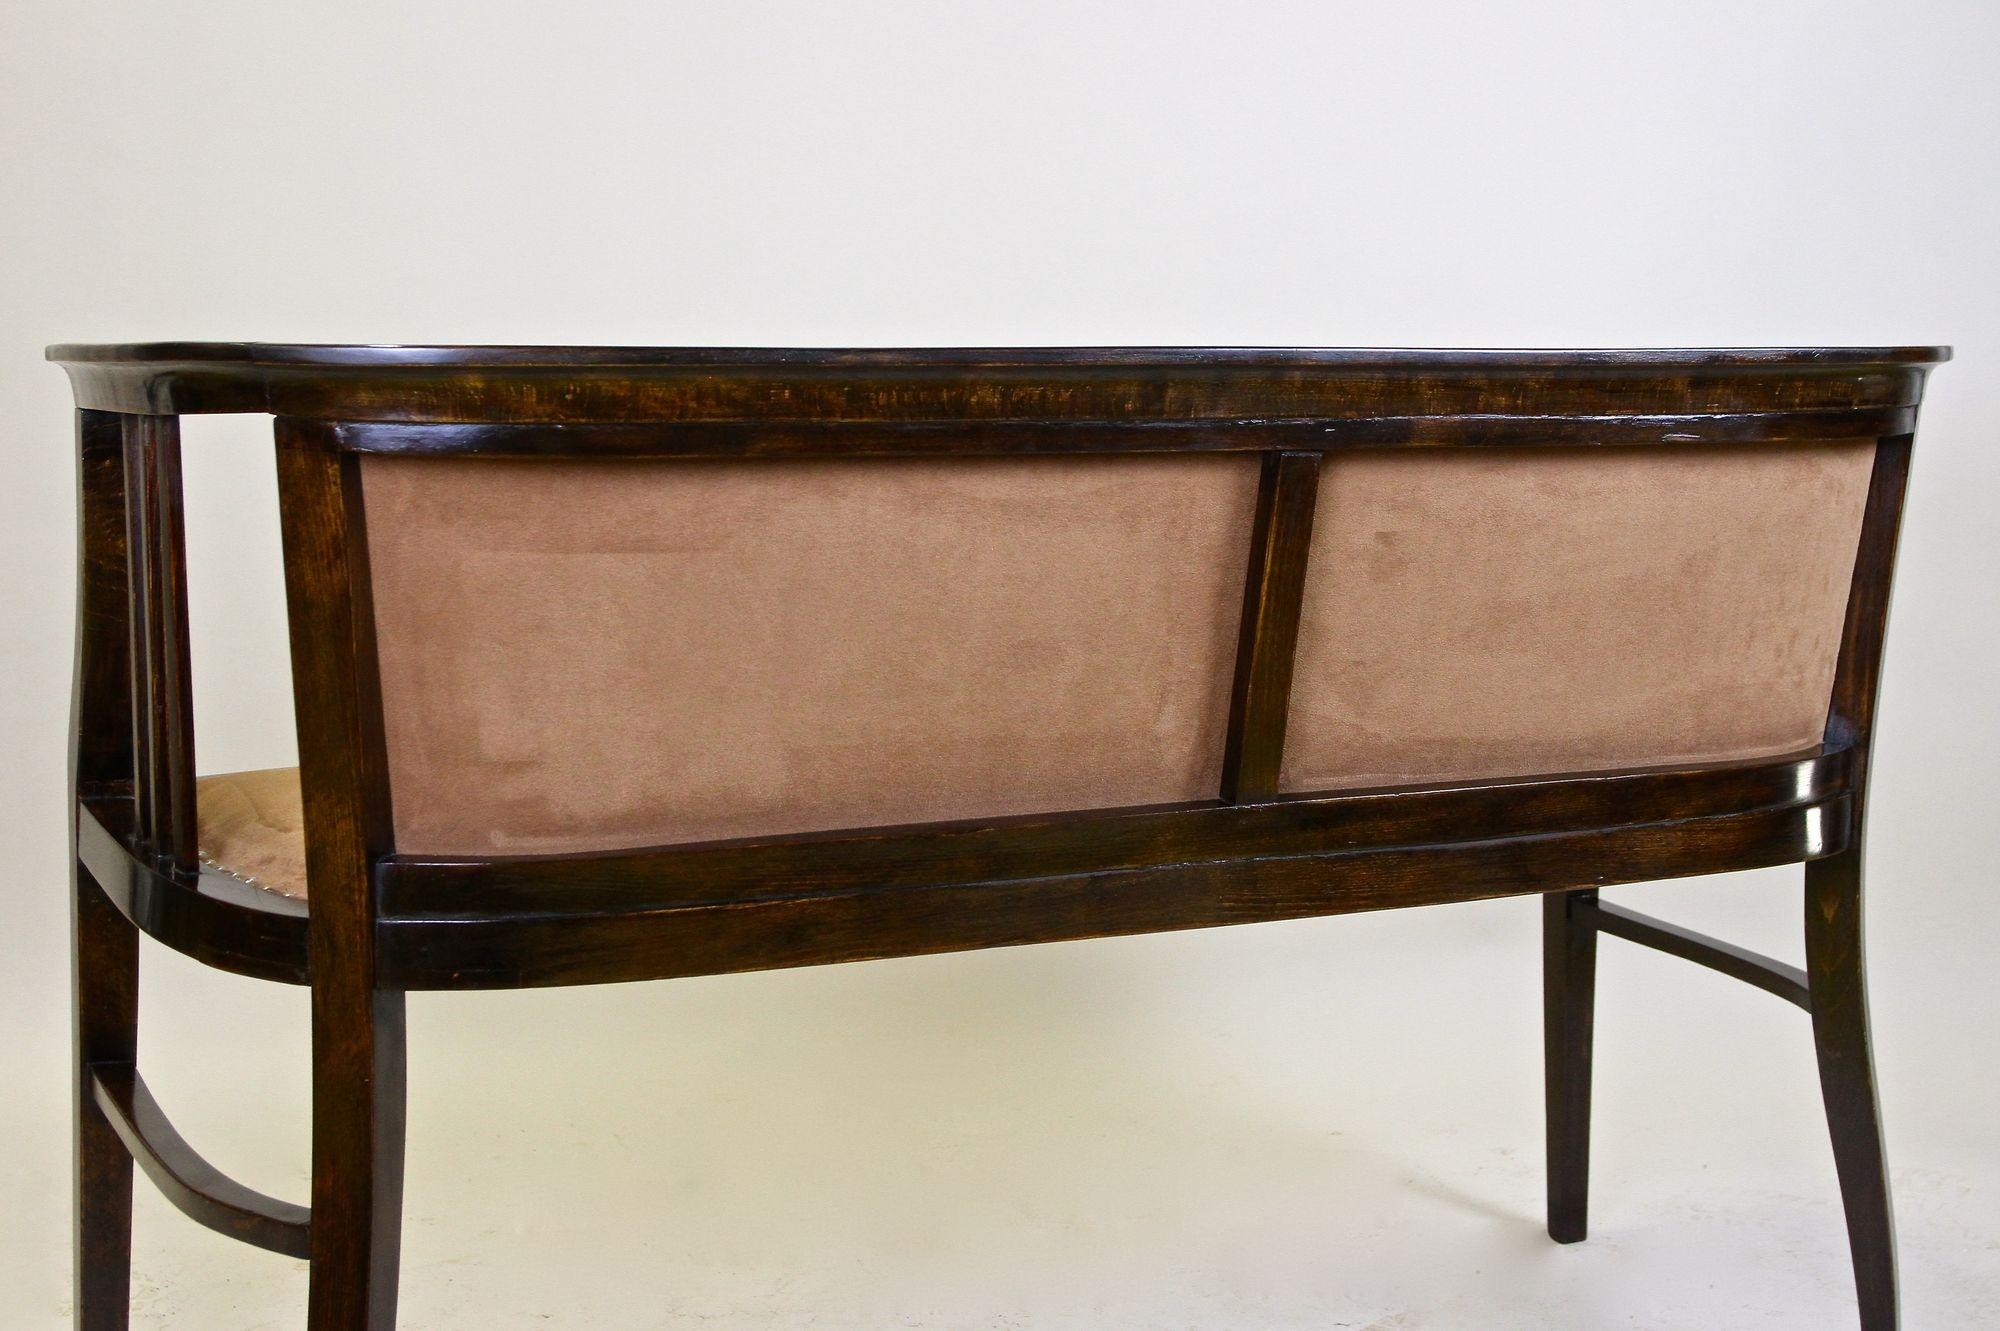 20th Century Art Nouveau Bentwood Bench, Newly Upholstered, Austria, circa 1910 For Sale 4